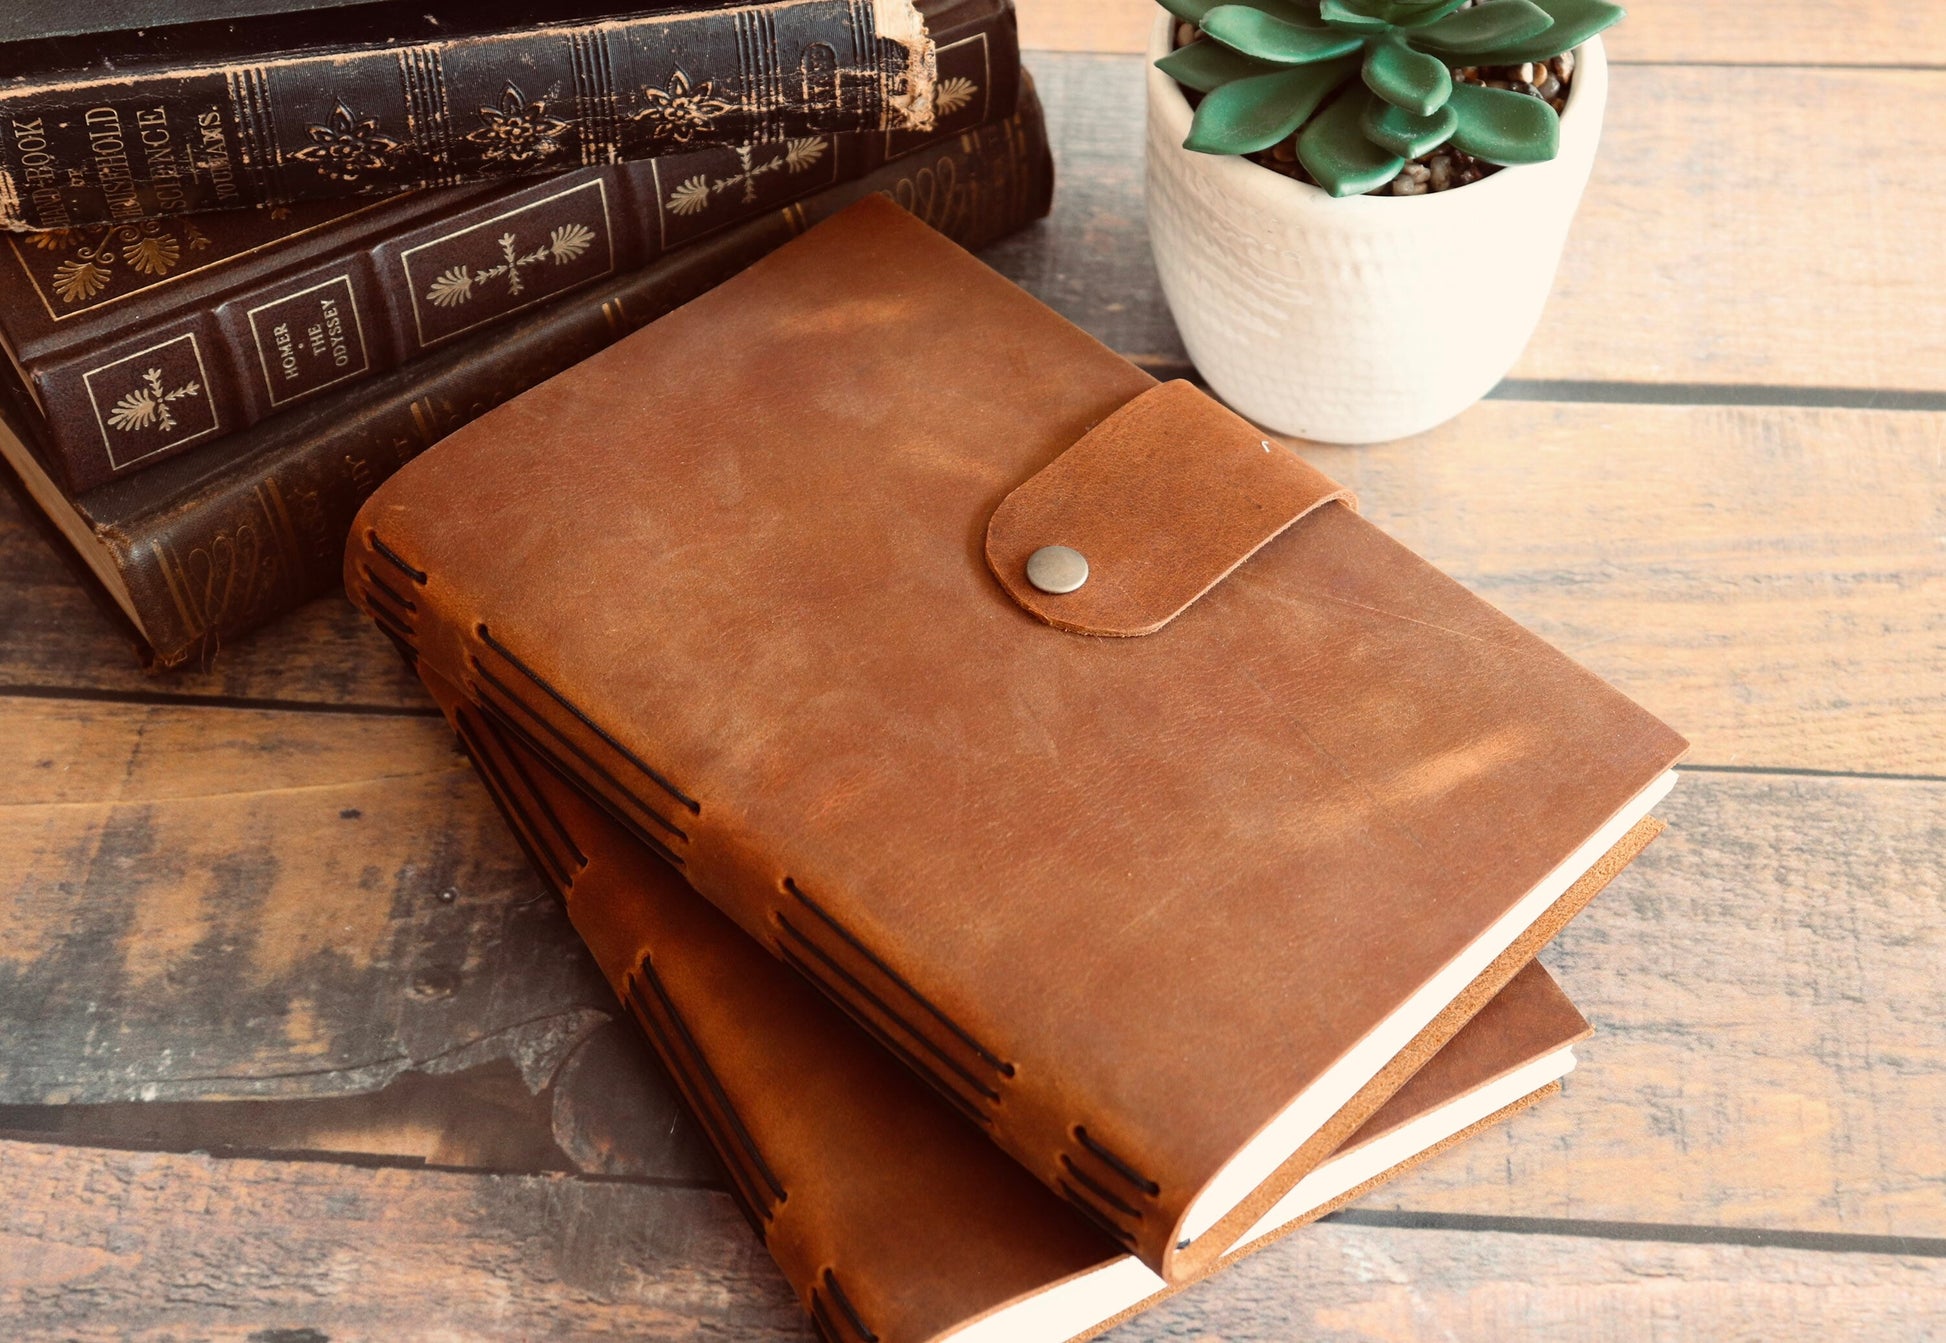 Refillable Premium Leather Journal, Rustic Vintage Writing Diary, Classic Button Snap Notebook Sketch Book, Customizable Personalized Gift